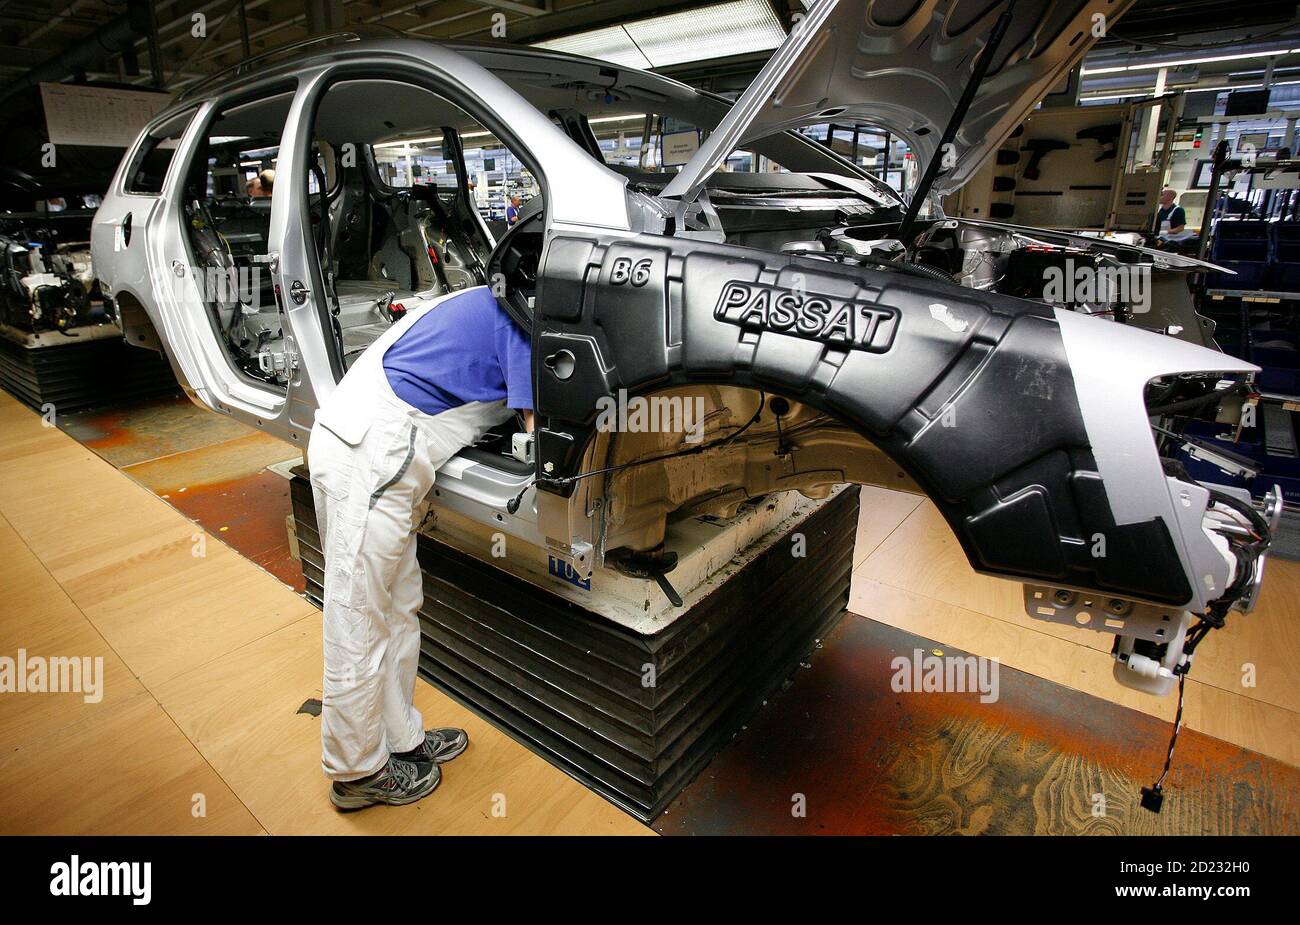 A Volkswagen employee works on a VW Passat at the construction line of Volkswagen plant in Emden April 24, 2009.   REUTERS/Christian Charisius (GERMANY TRANSPORT BUSINESS) Stock Photo